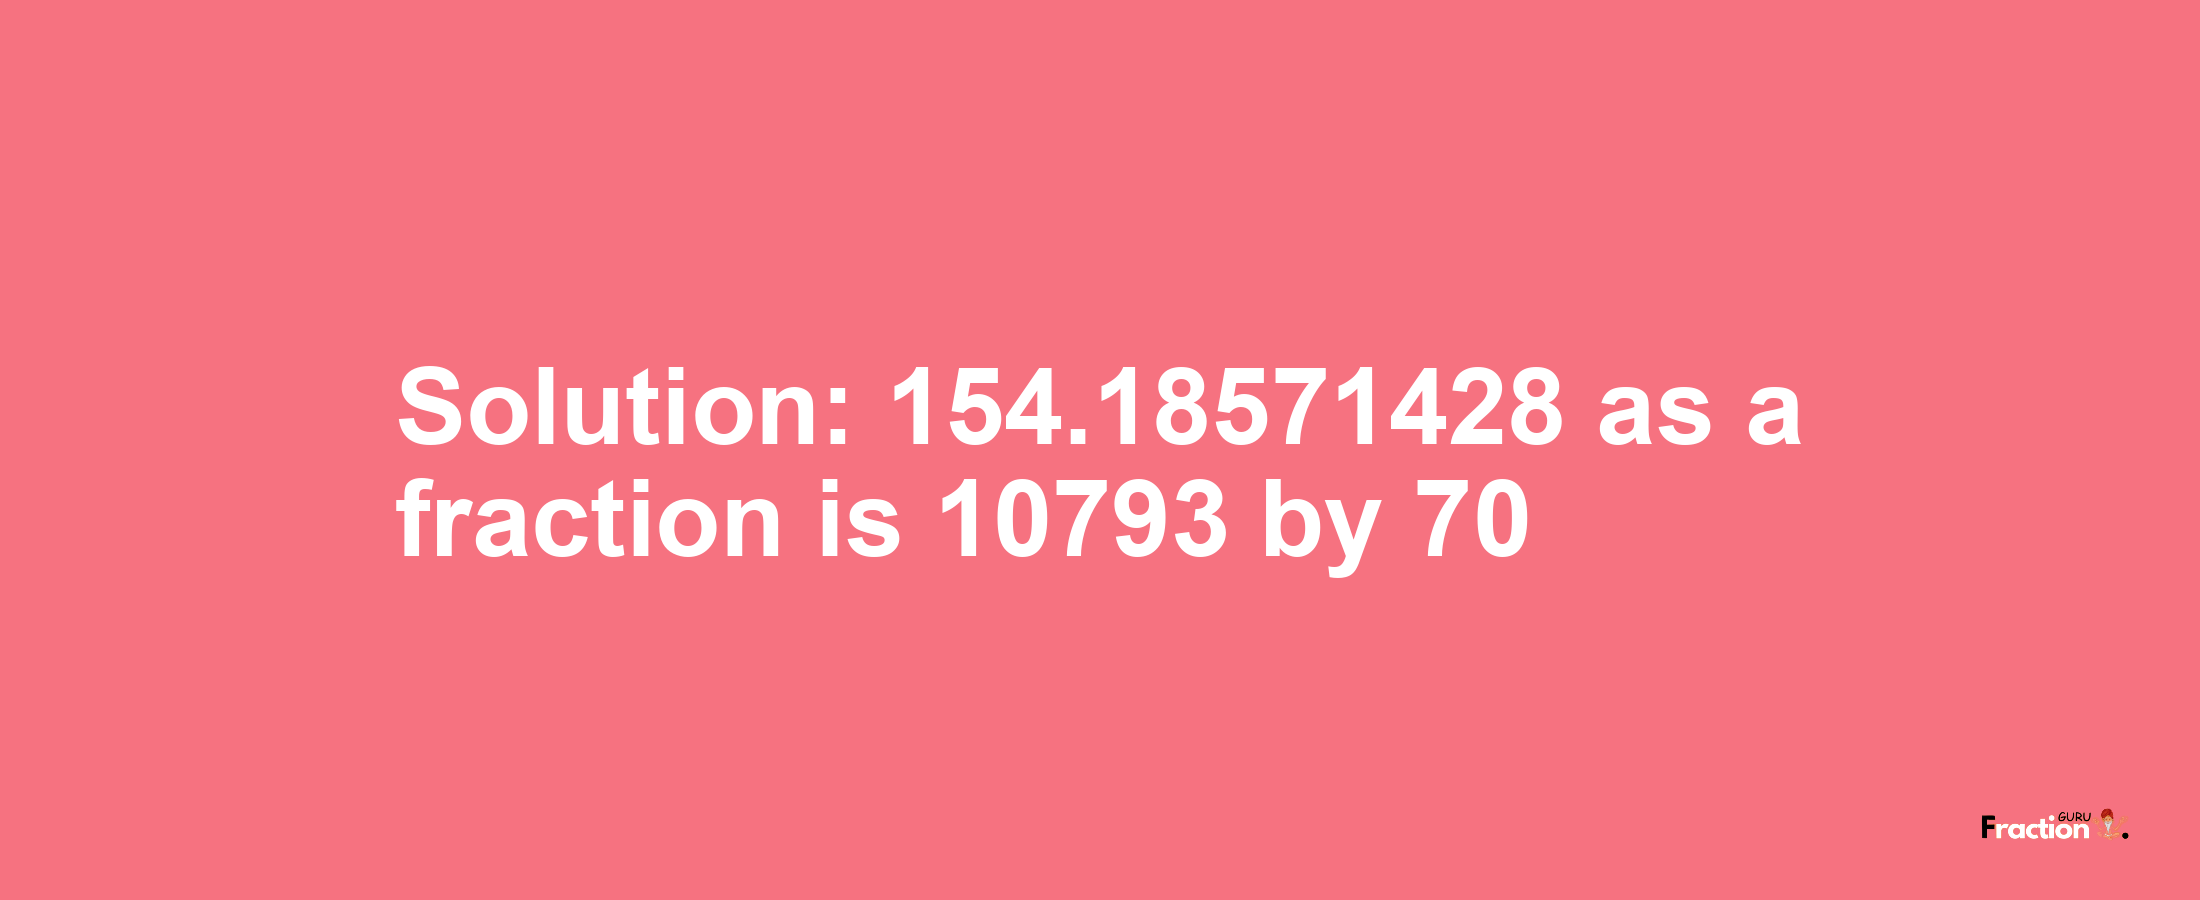 Solution:154.18571428 as a fraction is 10793/70